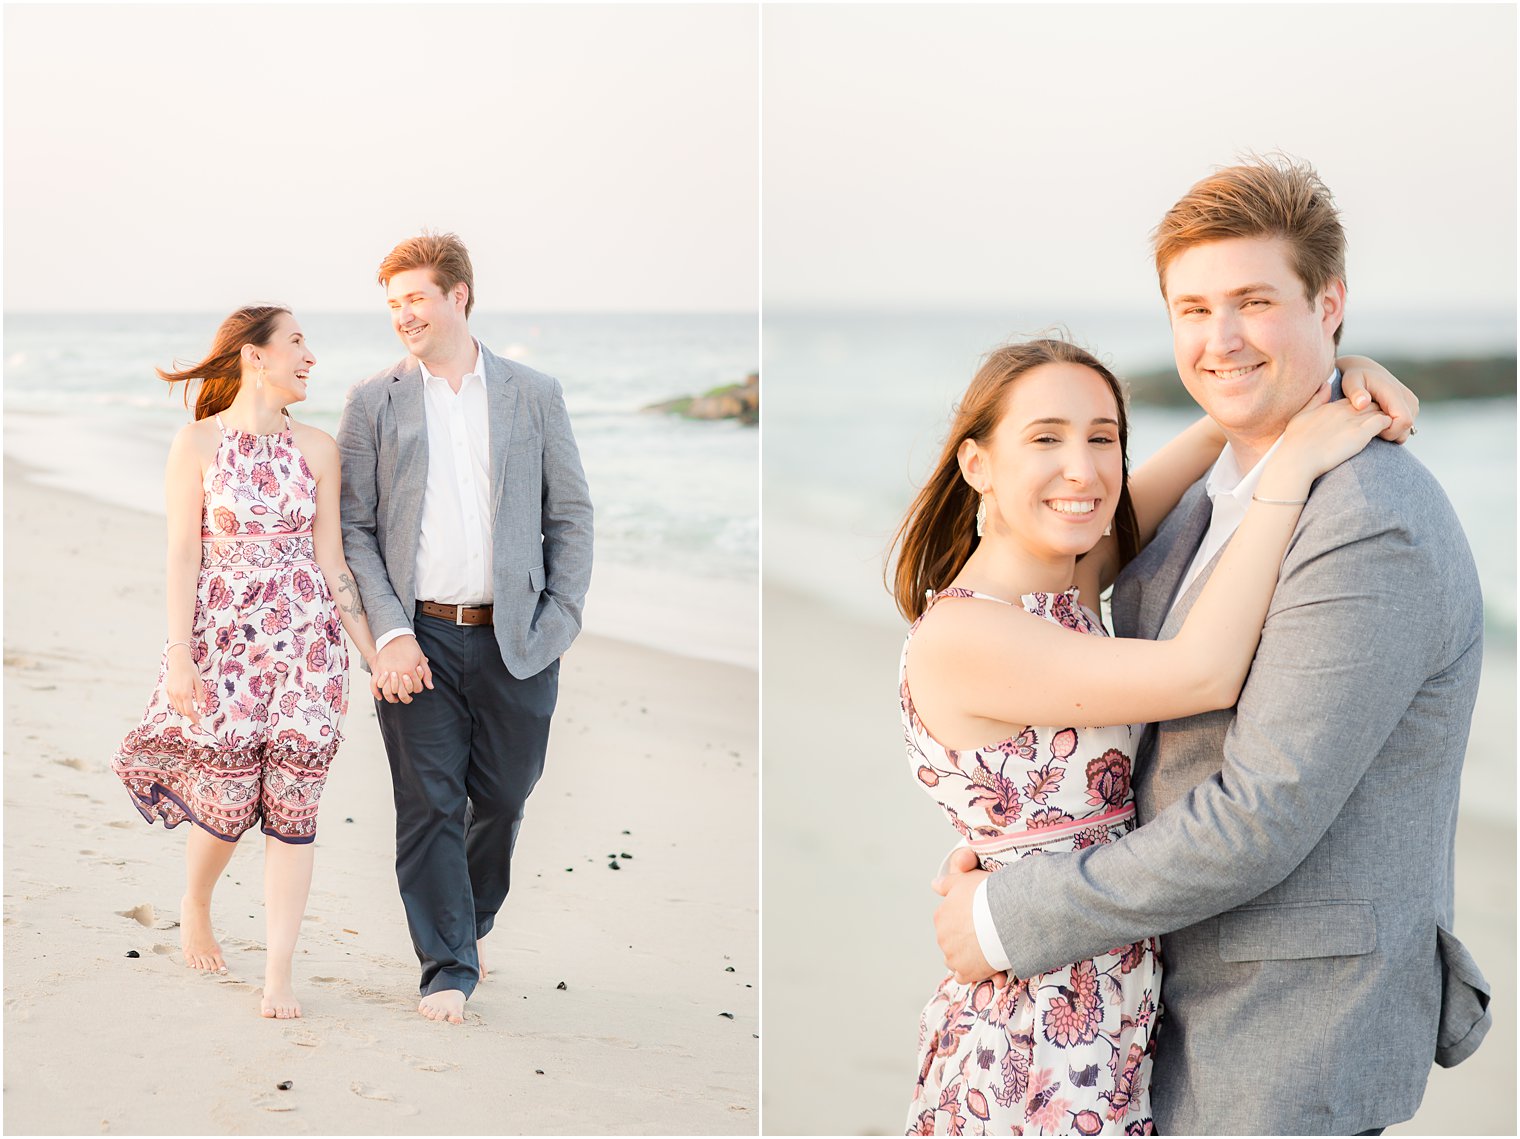 Classic engagement photos on the beach 